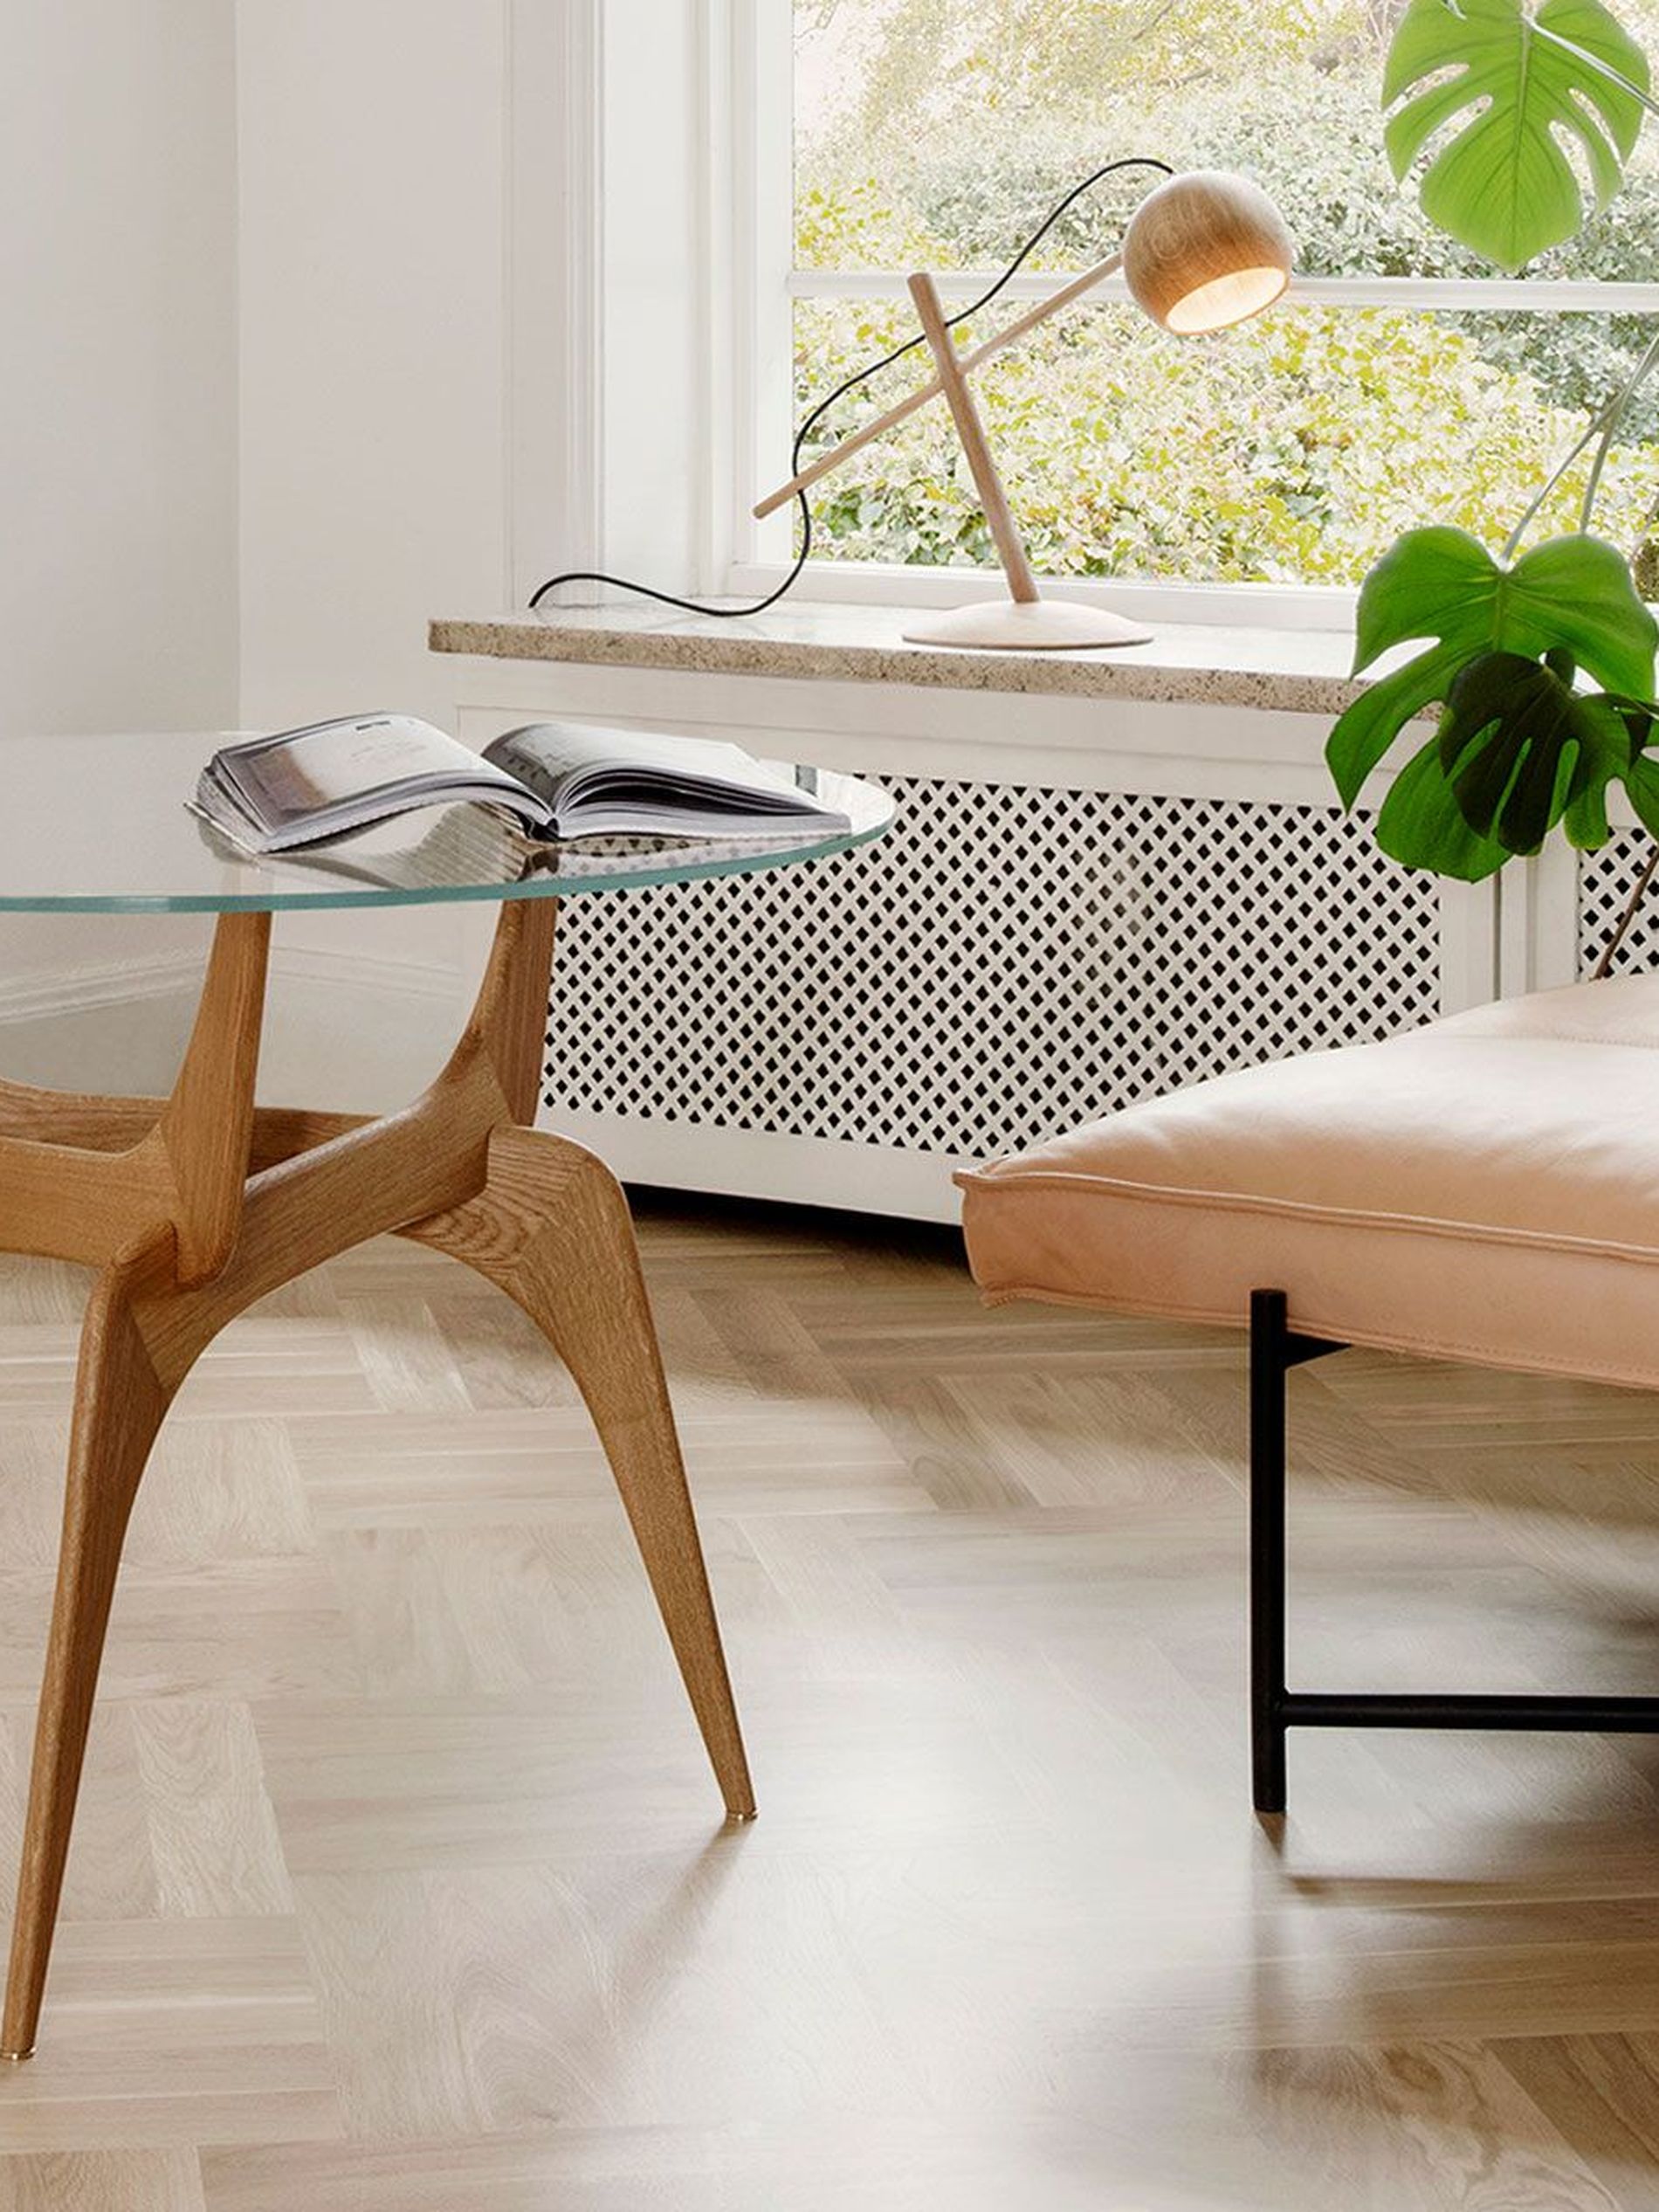 Hans Bølling’s 1958 TRIIO Coffee Table for production house Brdr Krüger